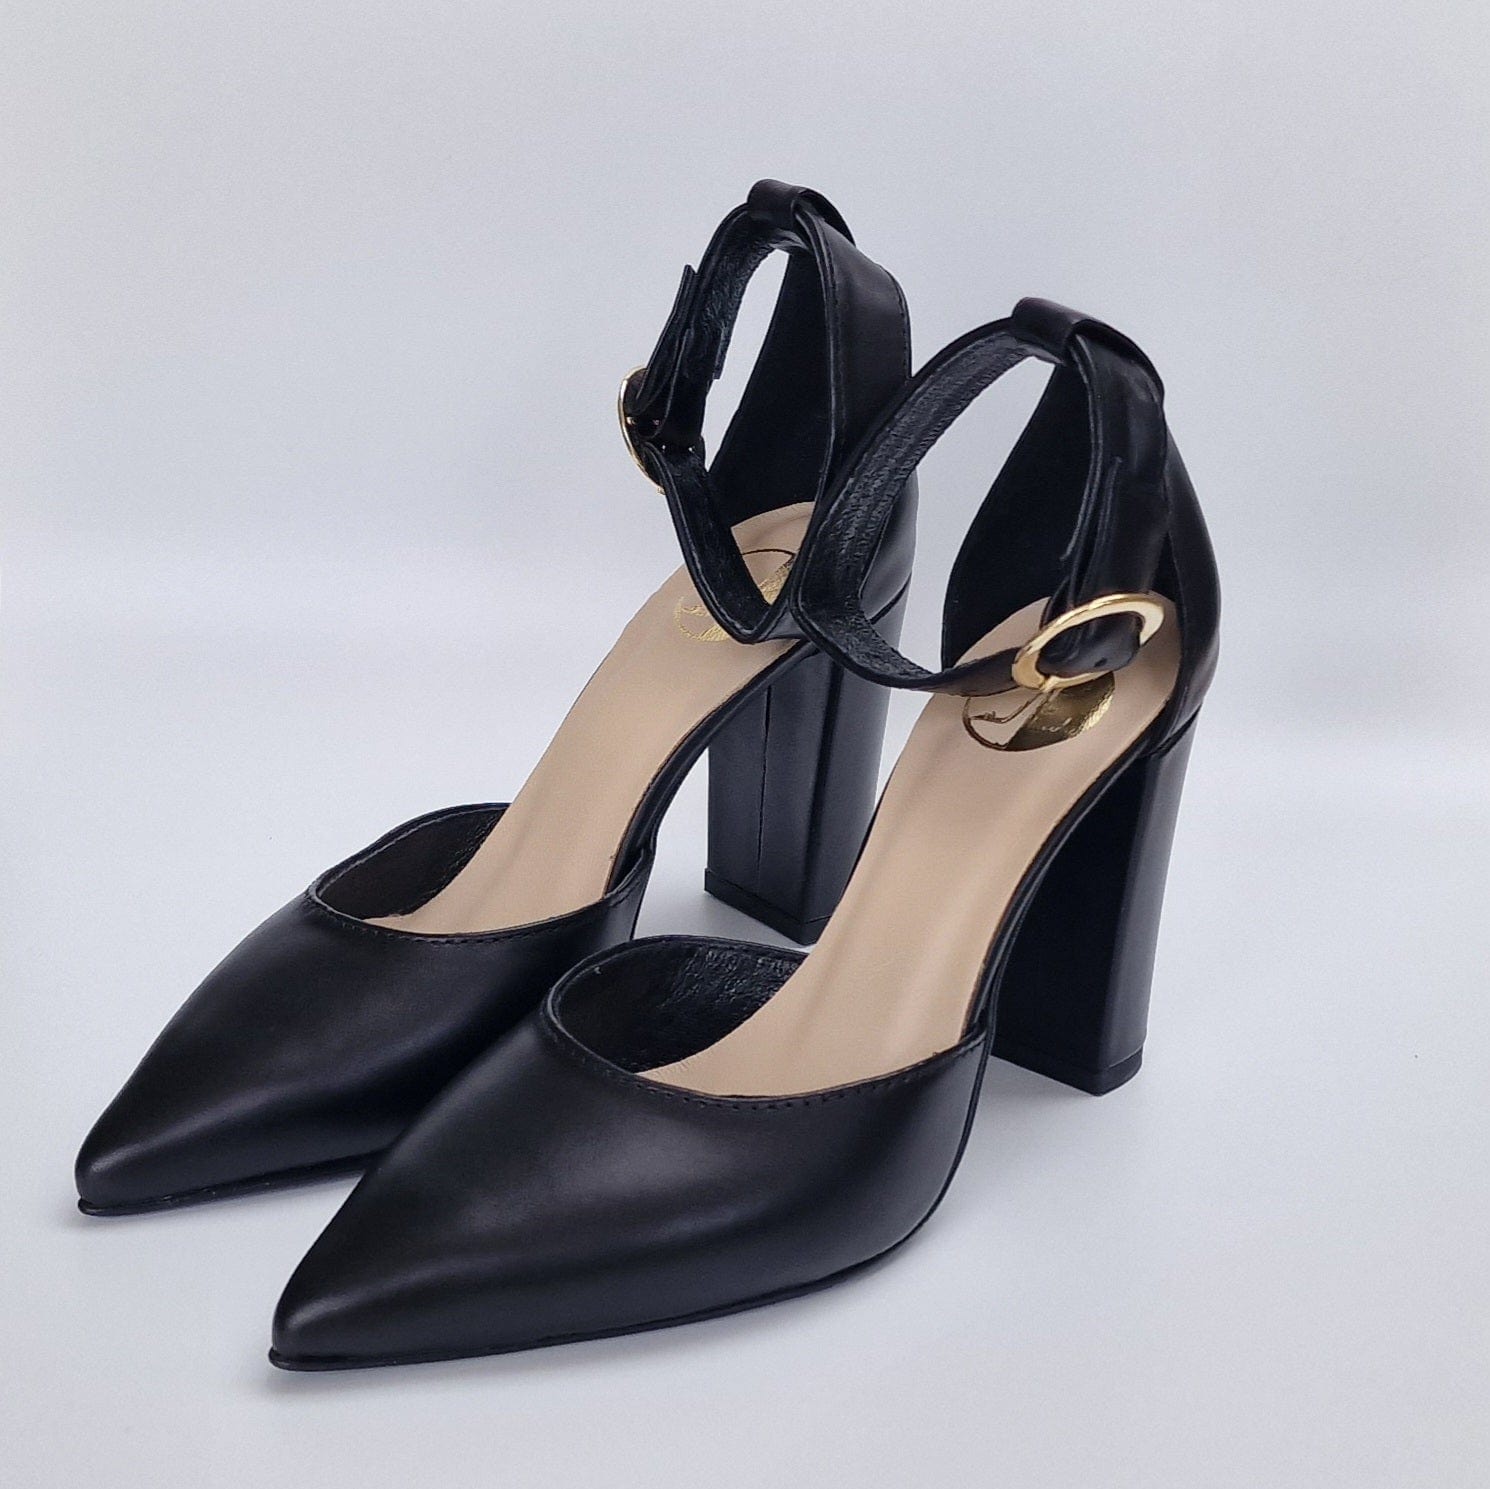 Pointed toe court heels in black leather